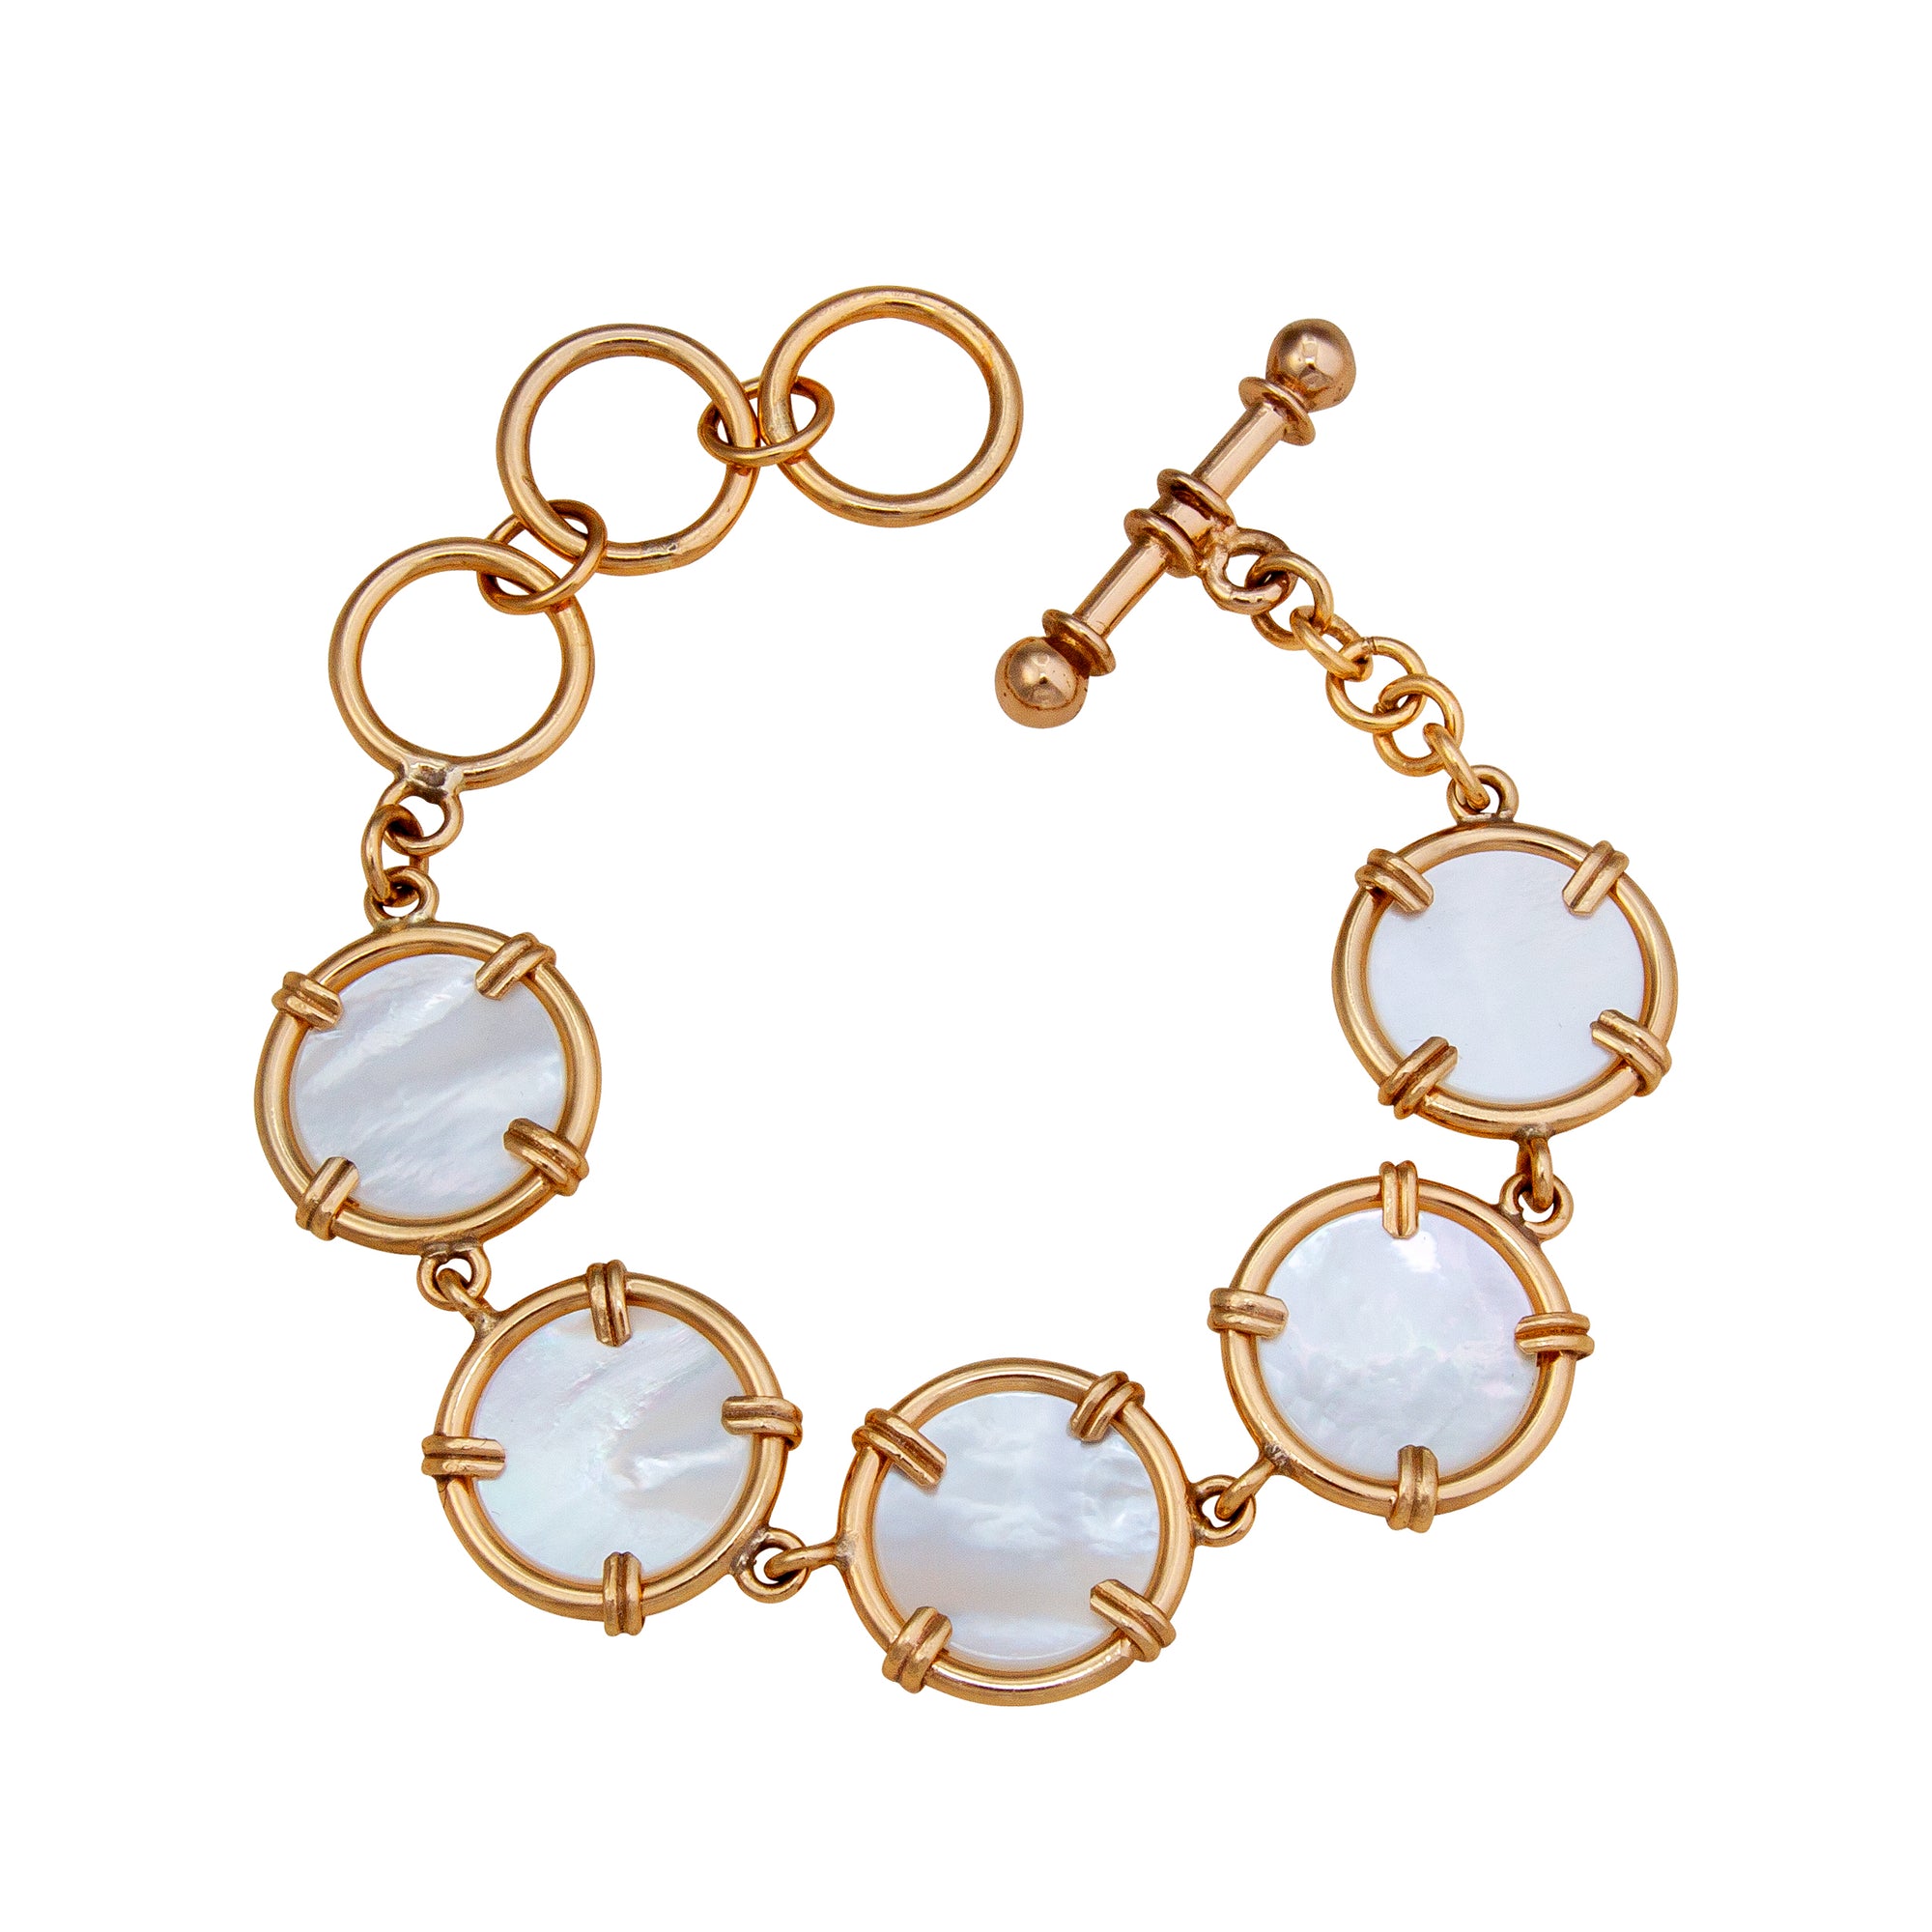 Alchemia Mother of Pearl Prong Set Bracelet | Charles Albert Jewelry